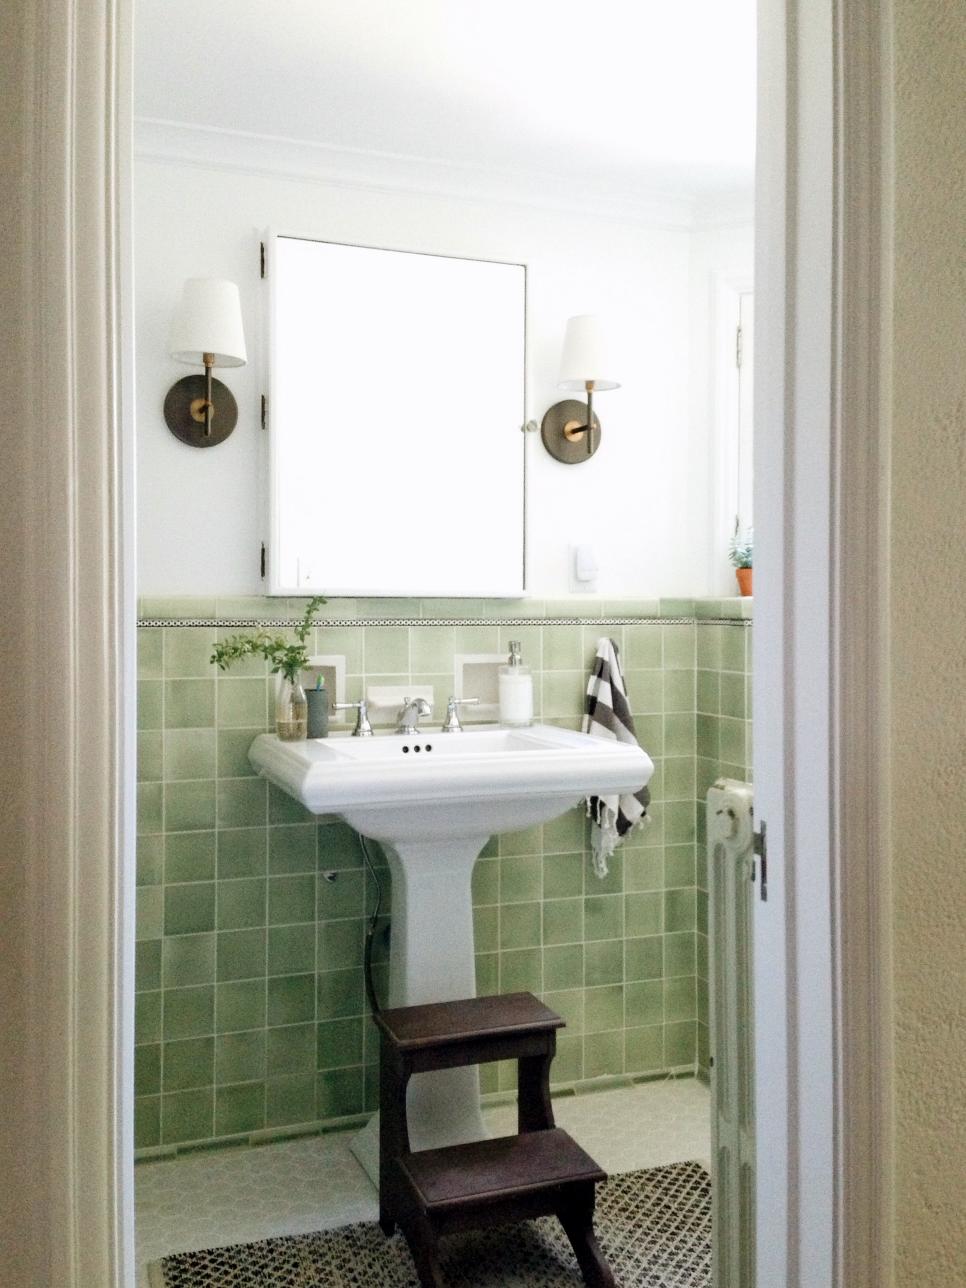 Vintage Small Bathroom with Green and White Tile and Pedestal Sink | HGTV